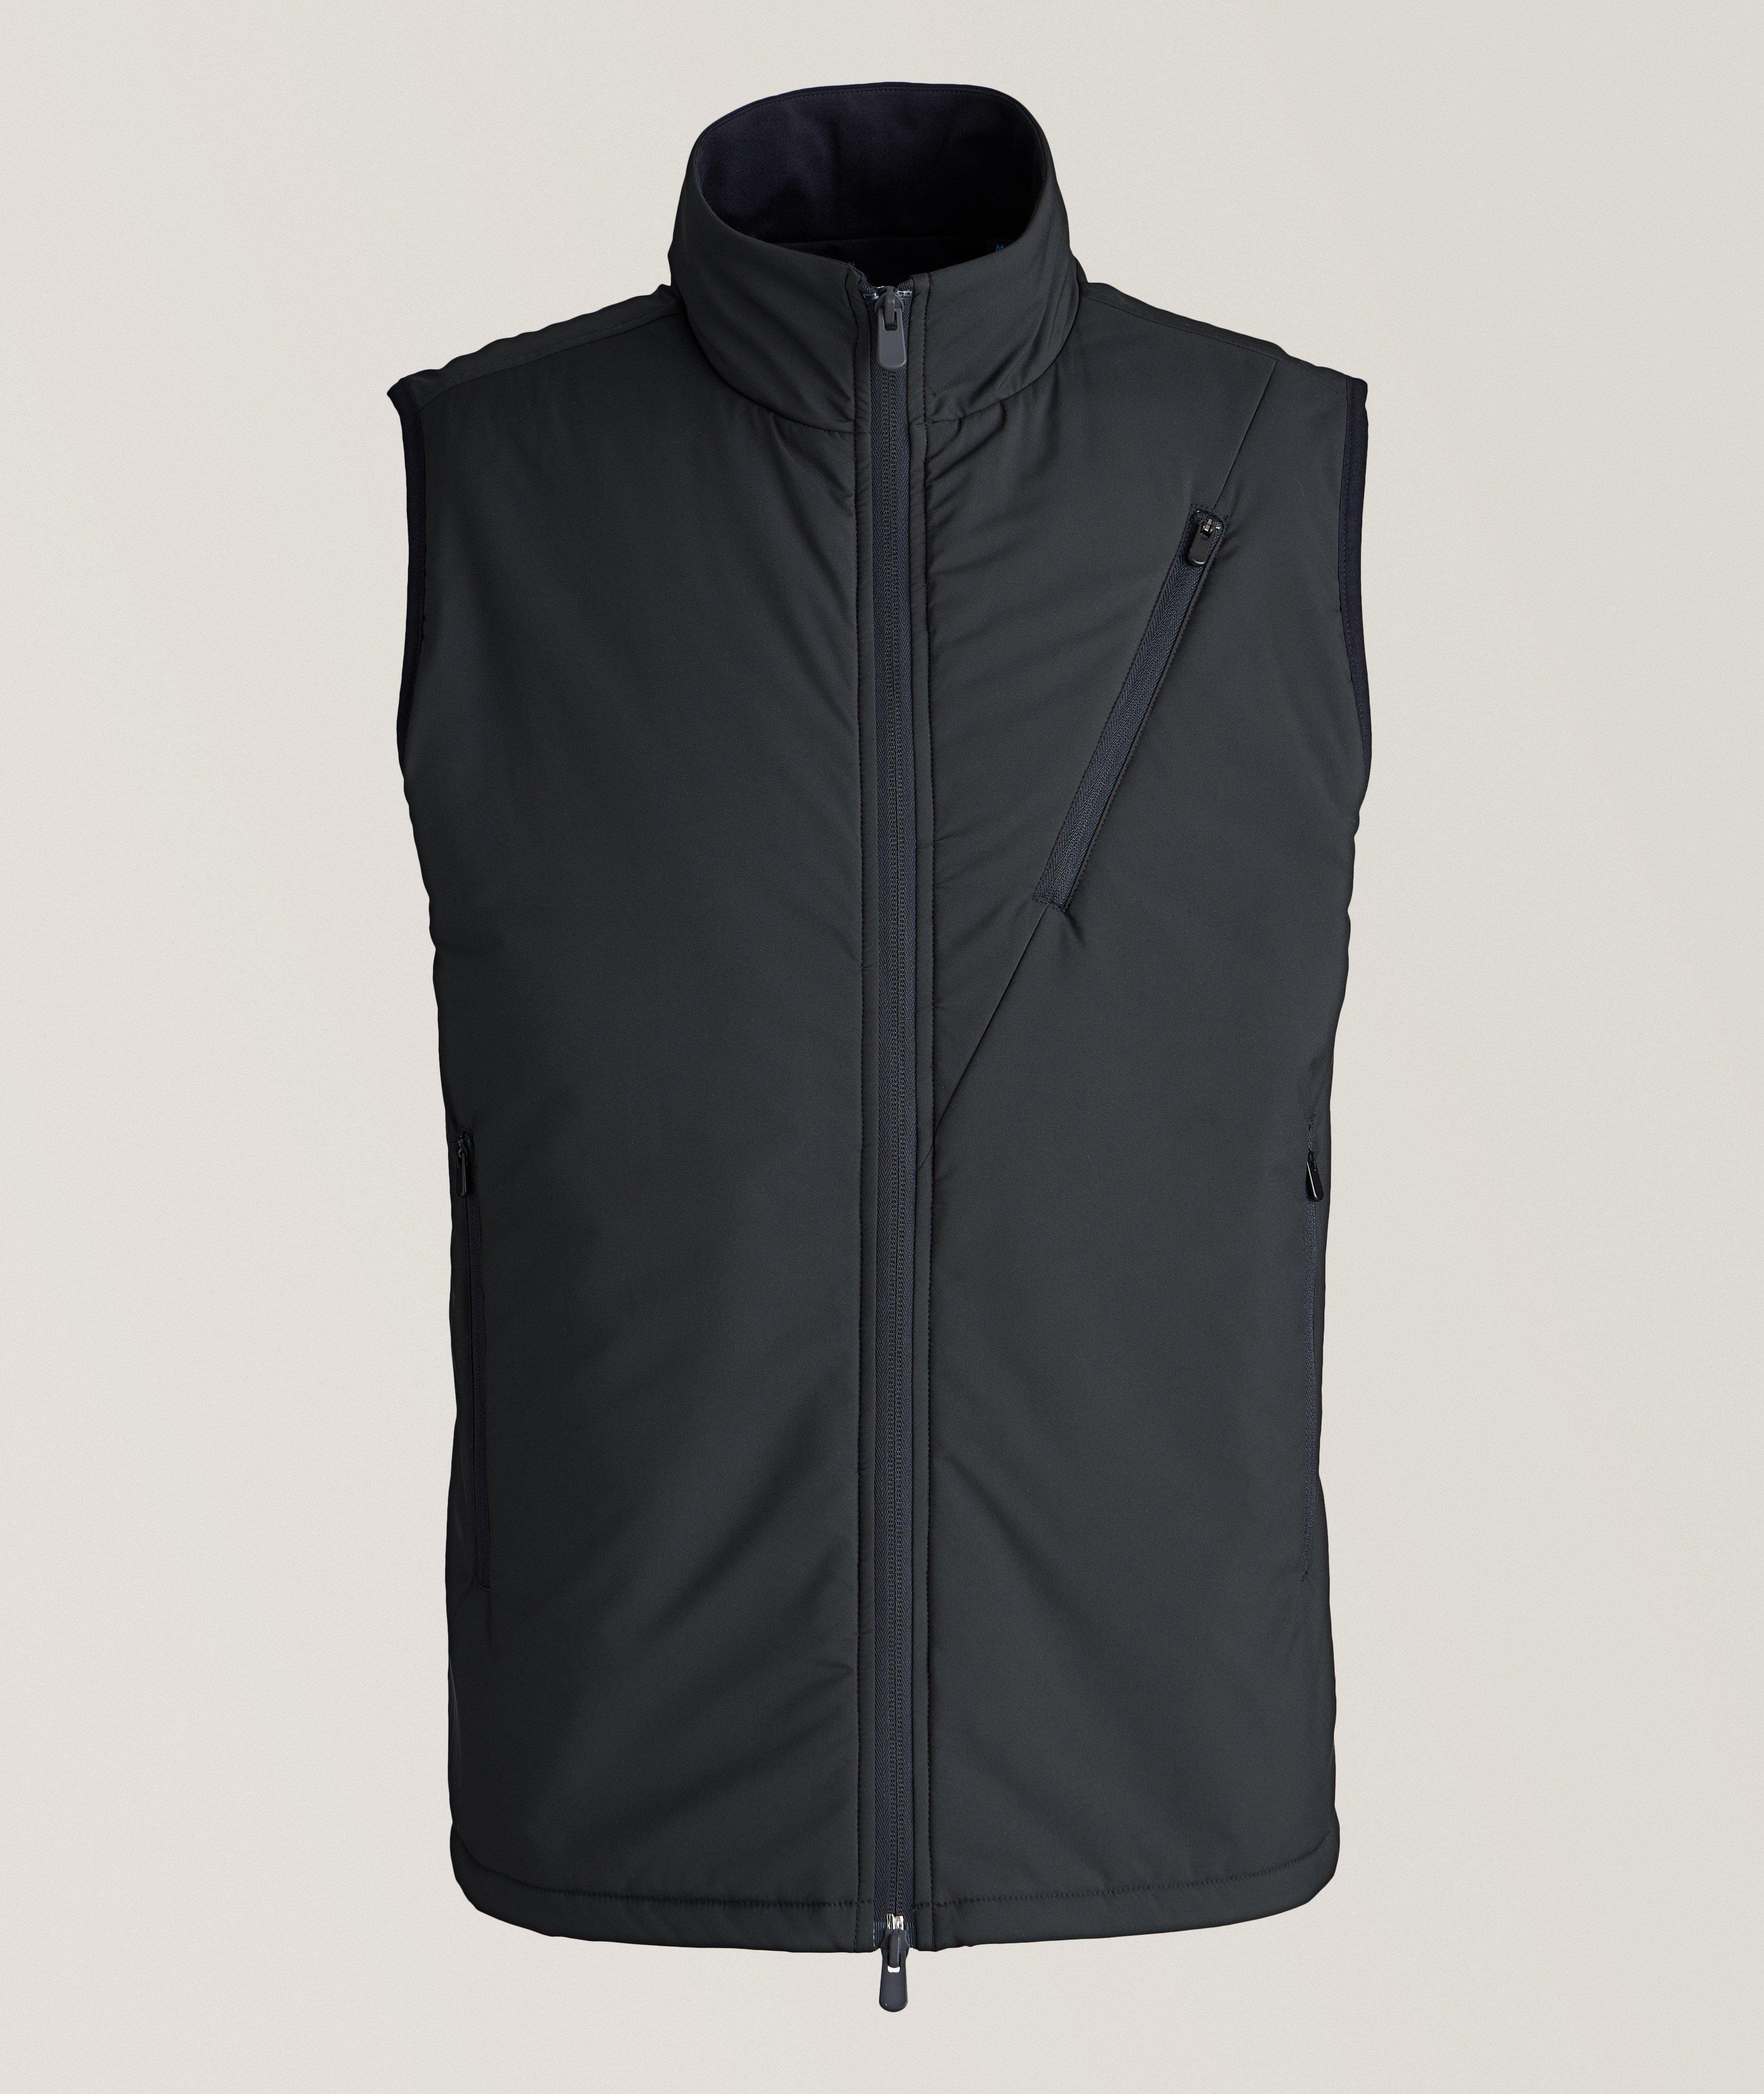 Technical Stretch Fabric Vest image 0